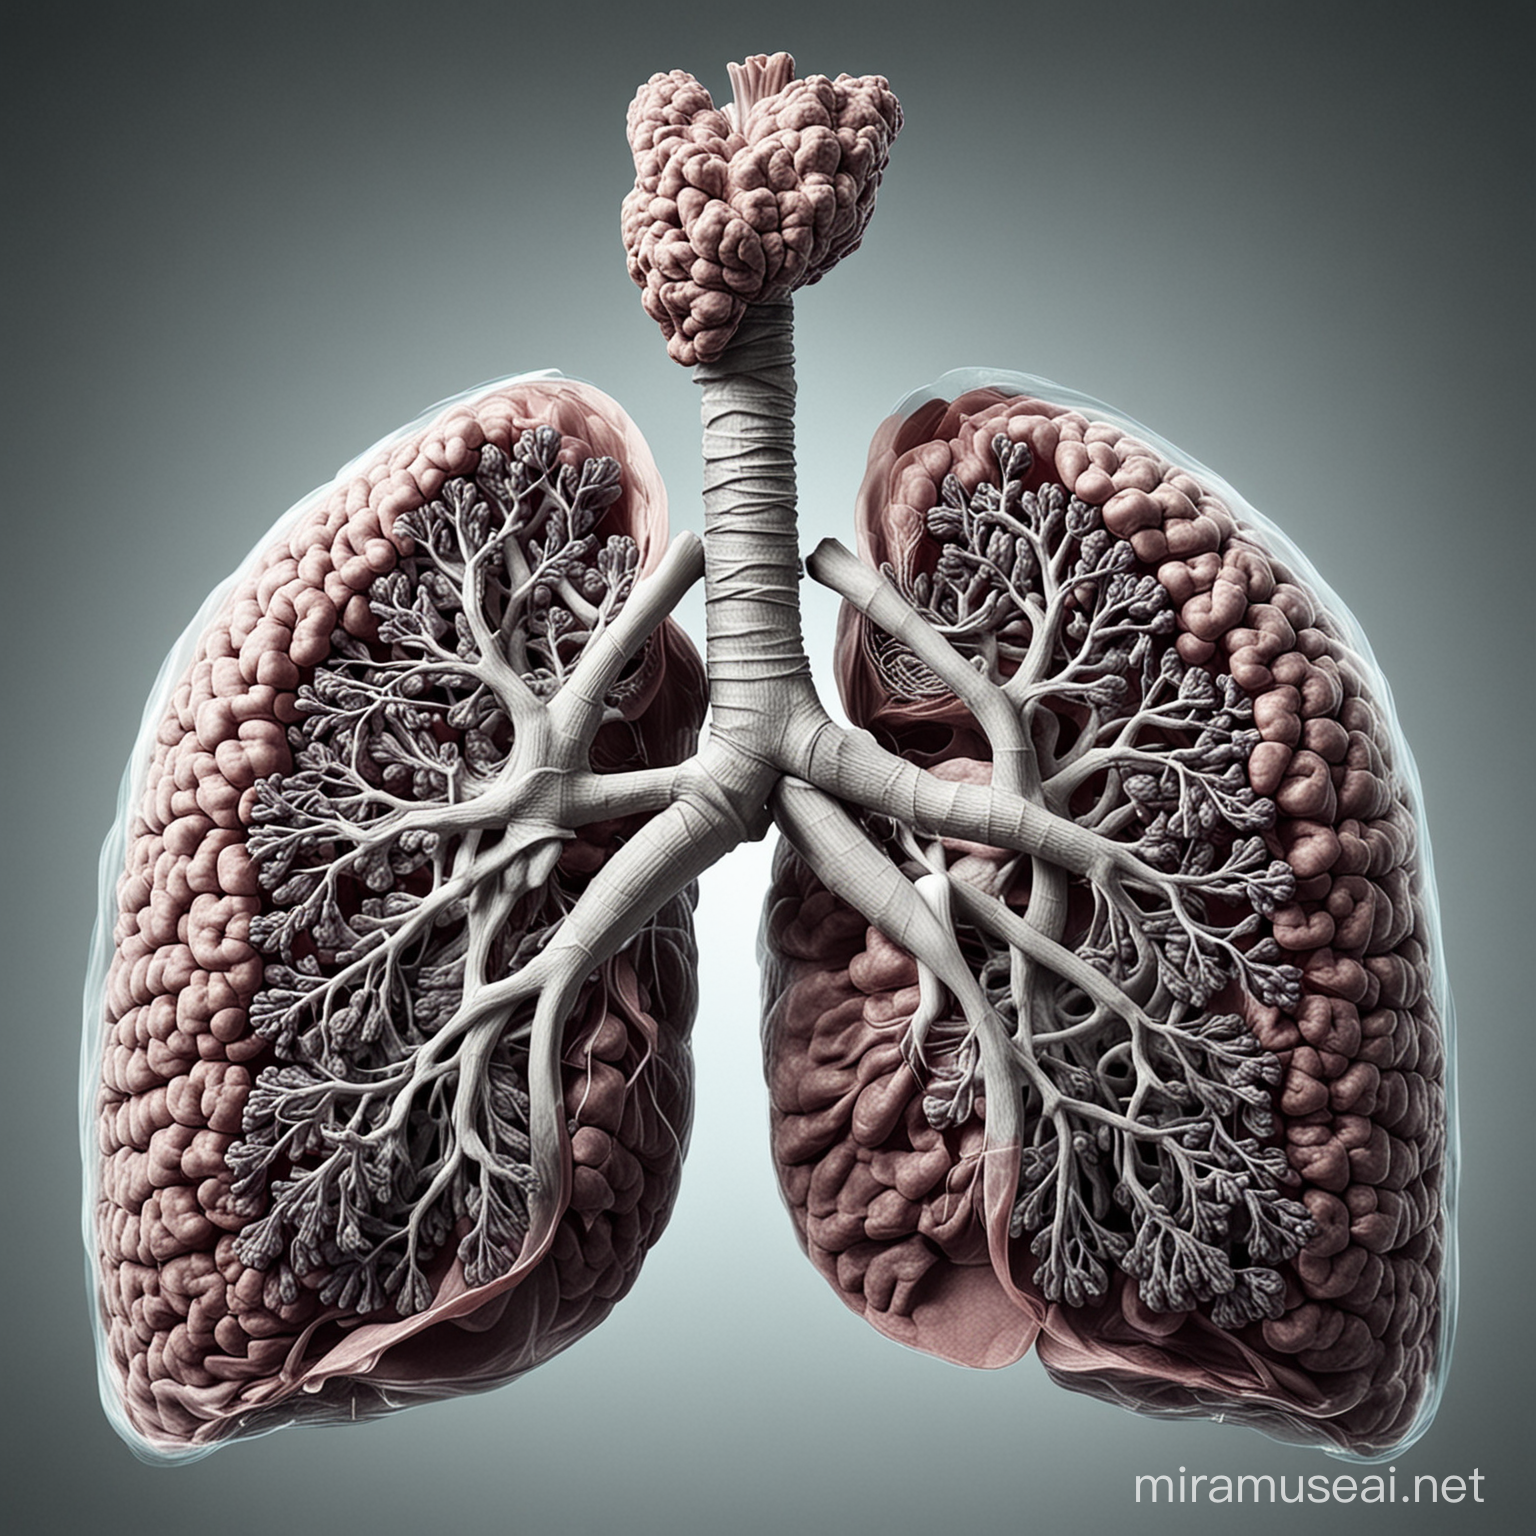 Funny Image related to lungs